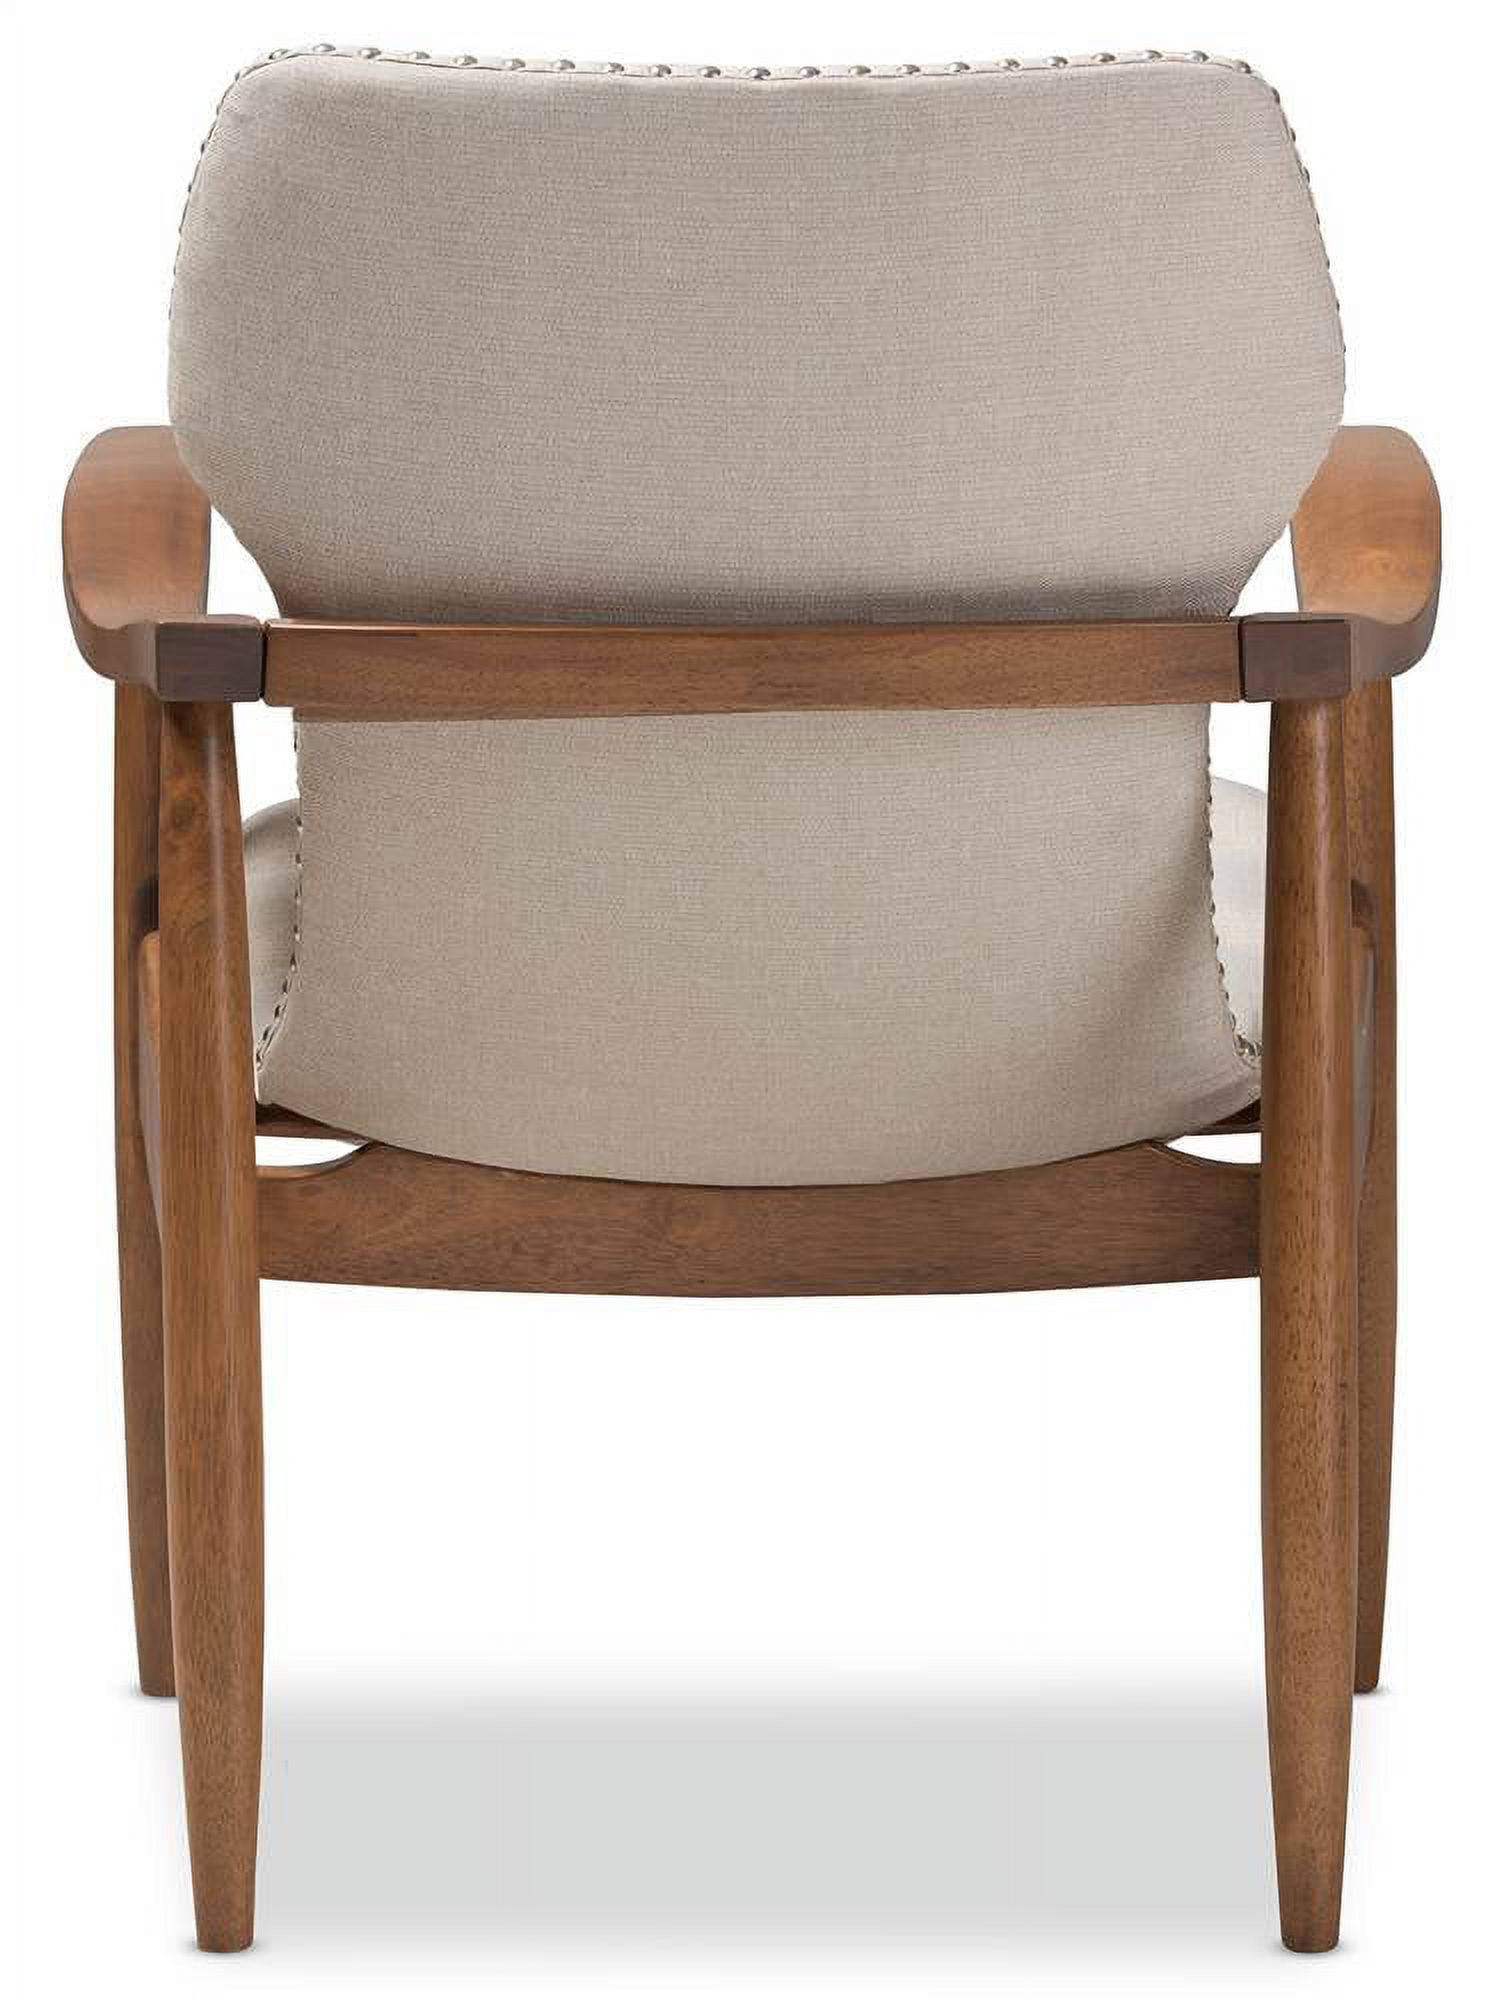 Mid-Century Modern Lounge Chair in Light Beige and Walnut Brown - image 4 of 6